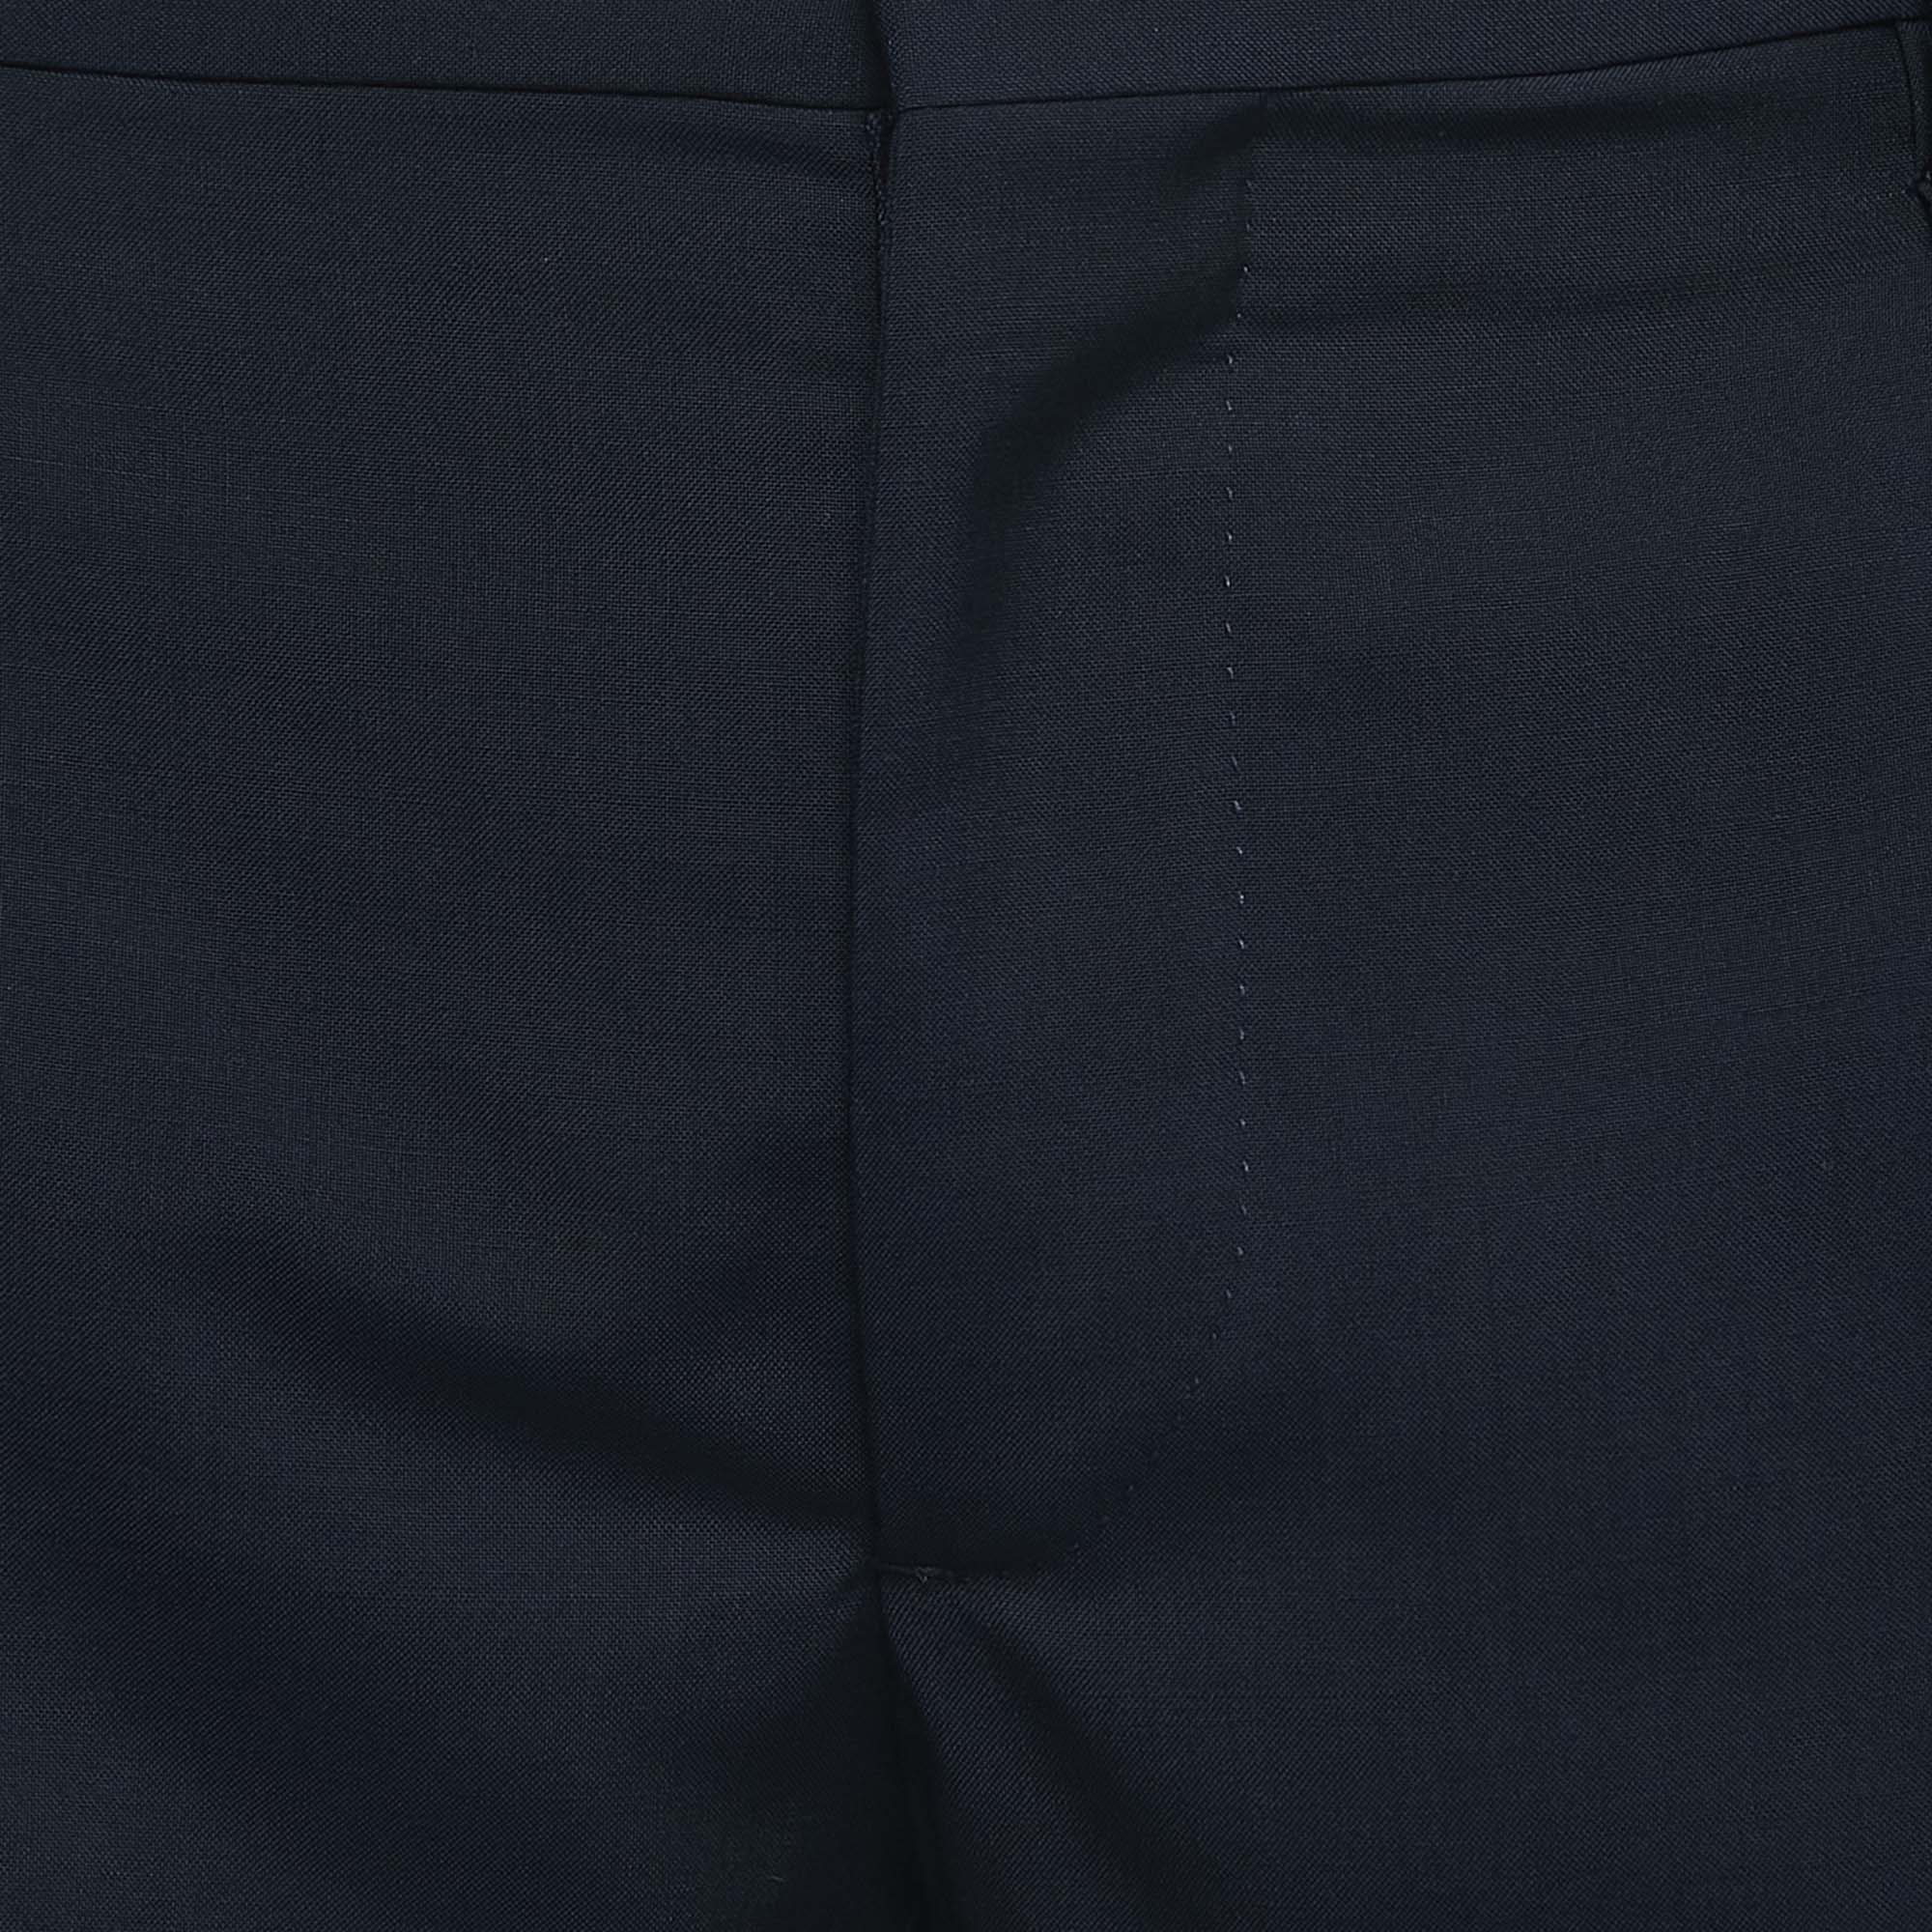 Valentino Navy Blue Wool Tailored Trousers S